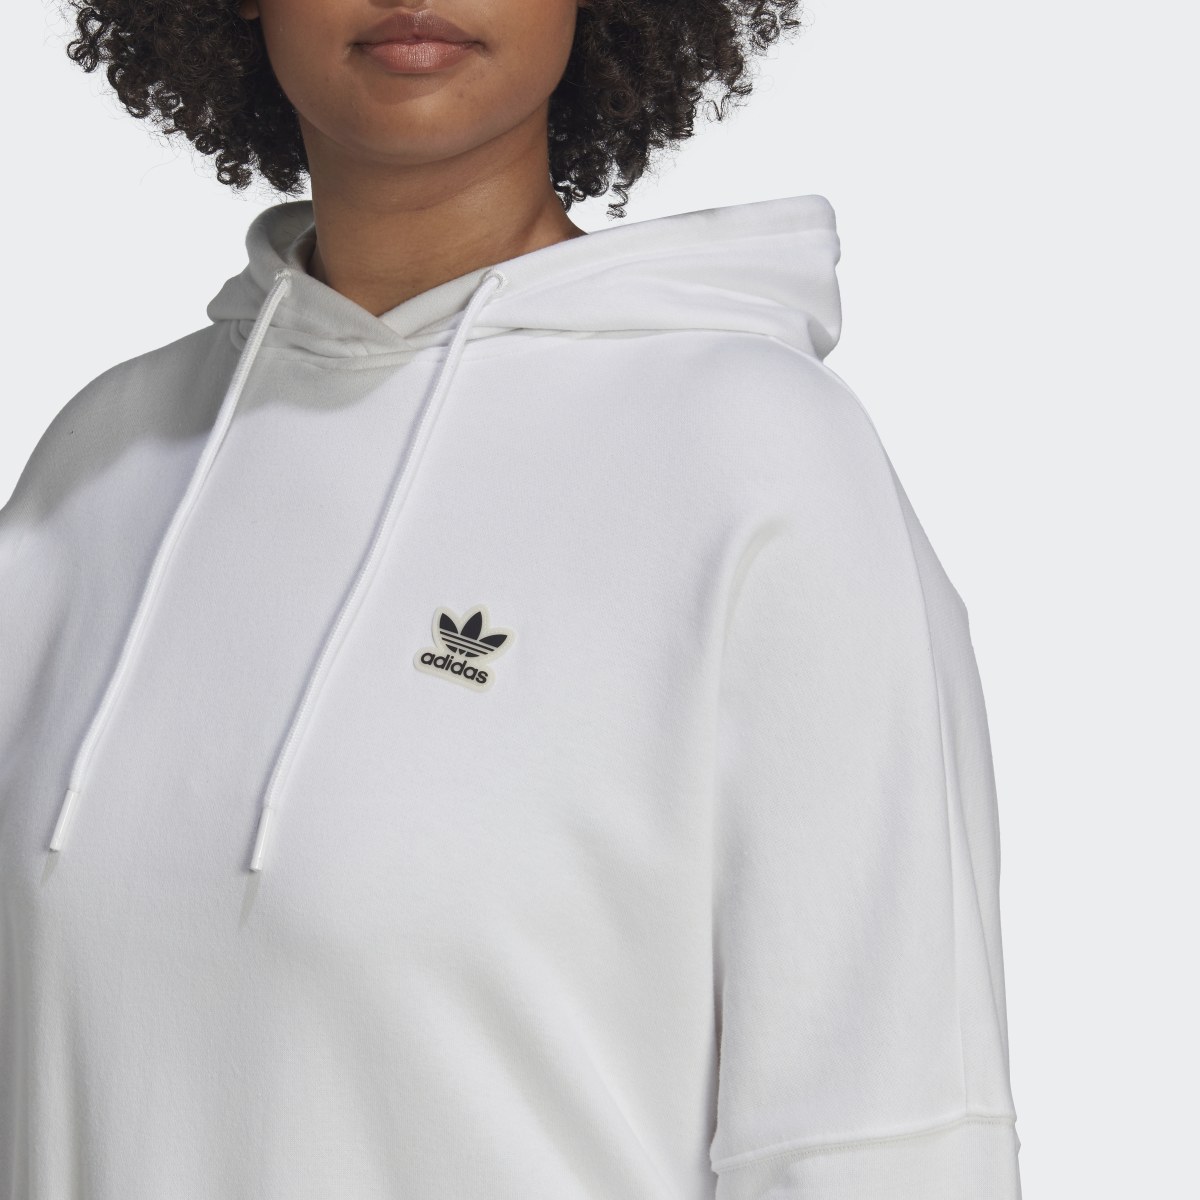 Adidas Cropped Hoodie (Plus Size). 6